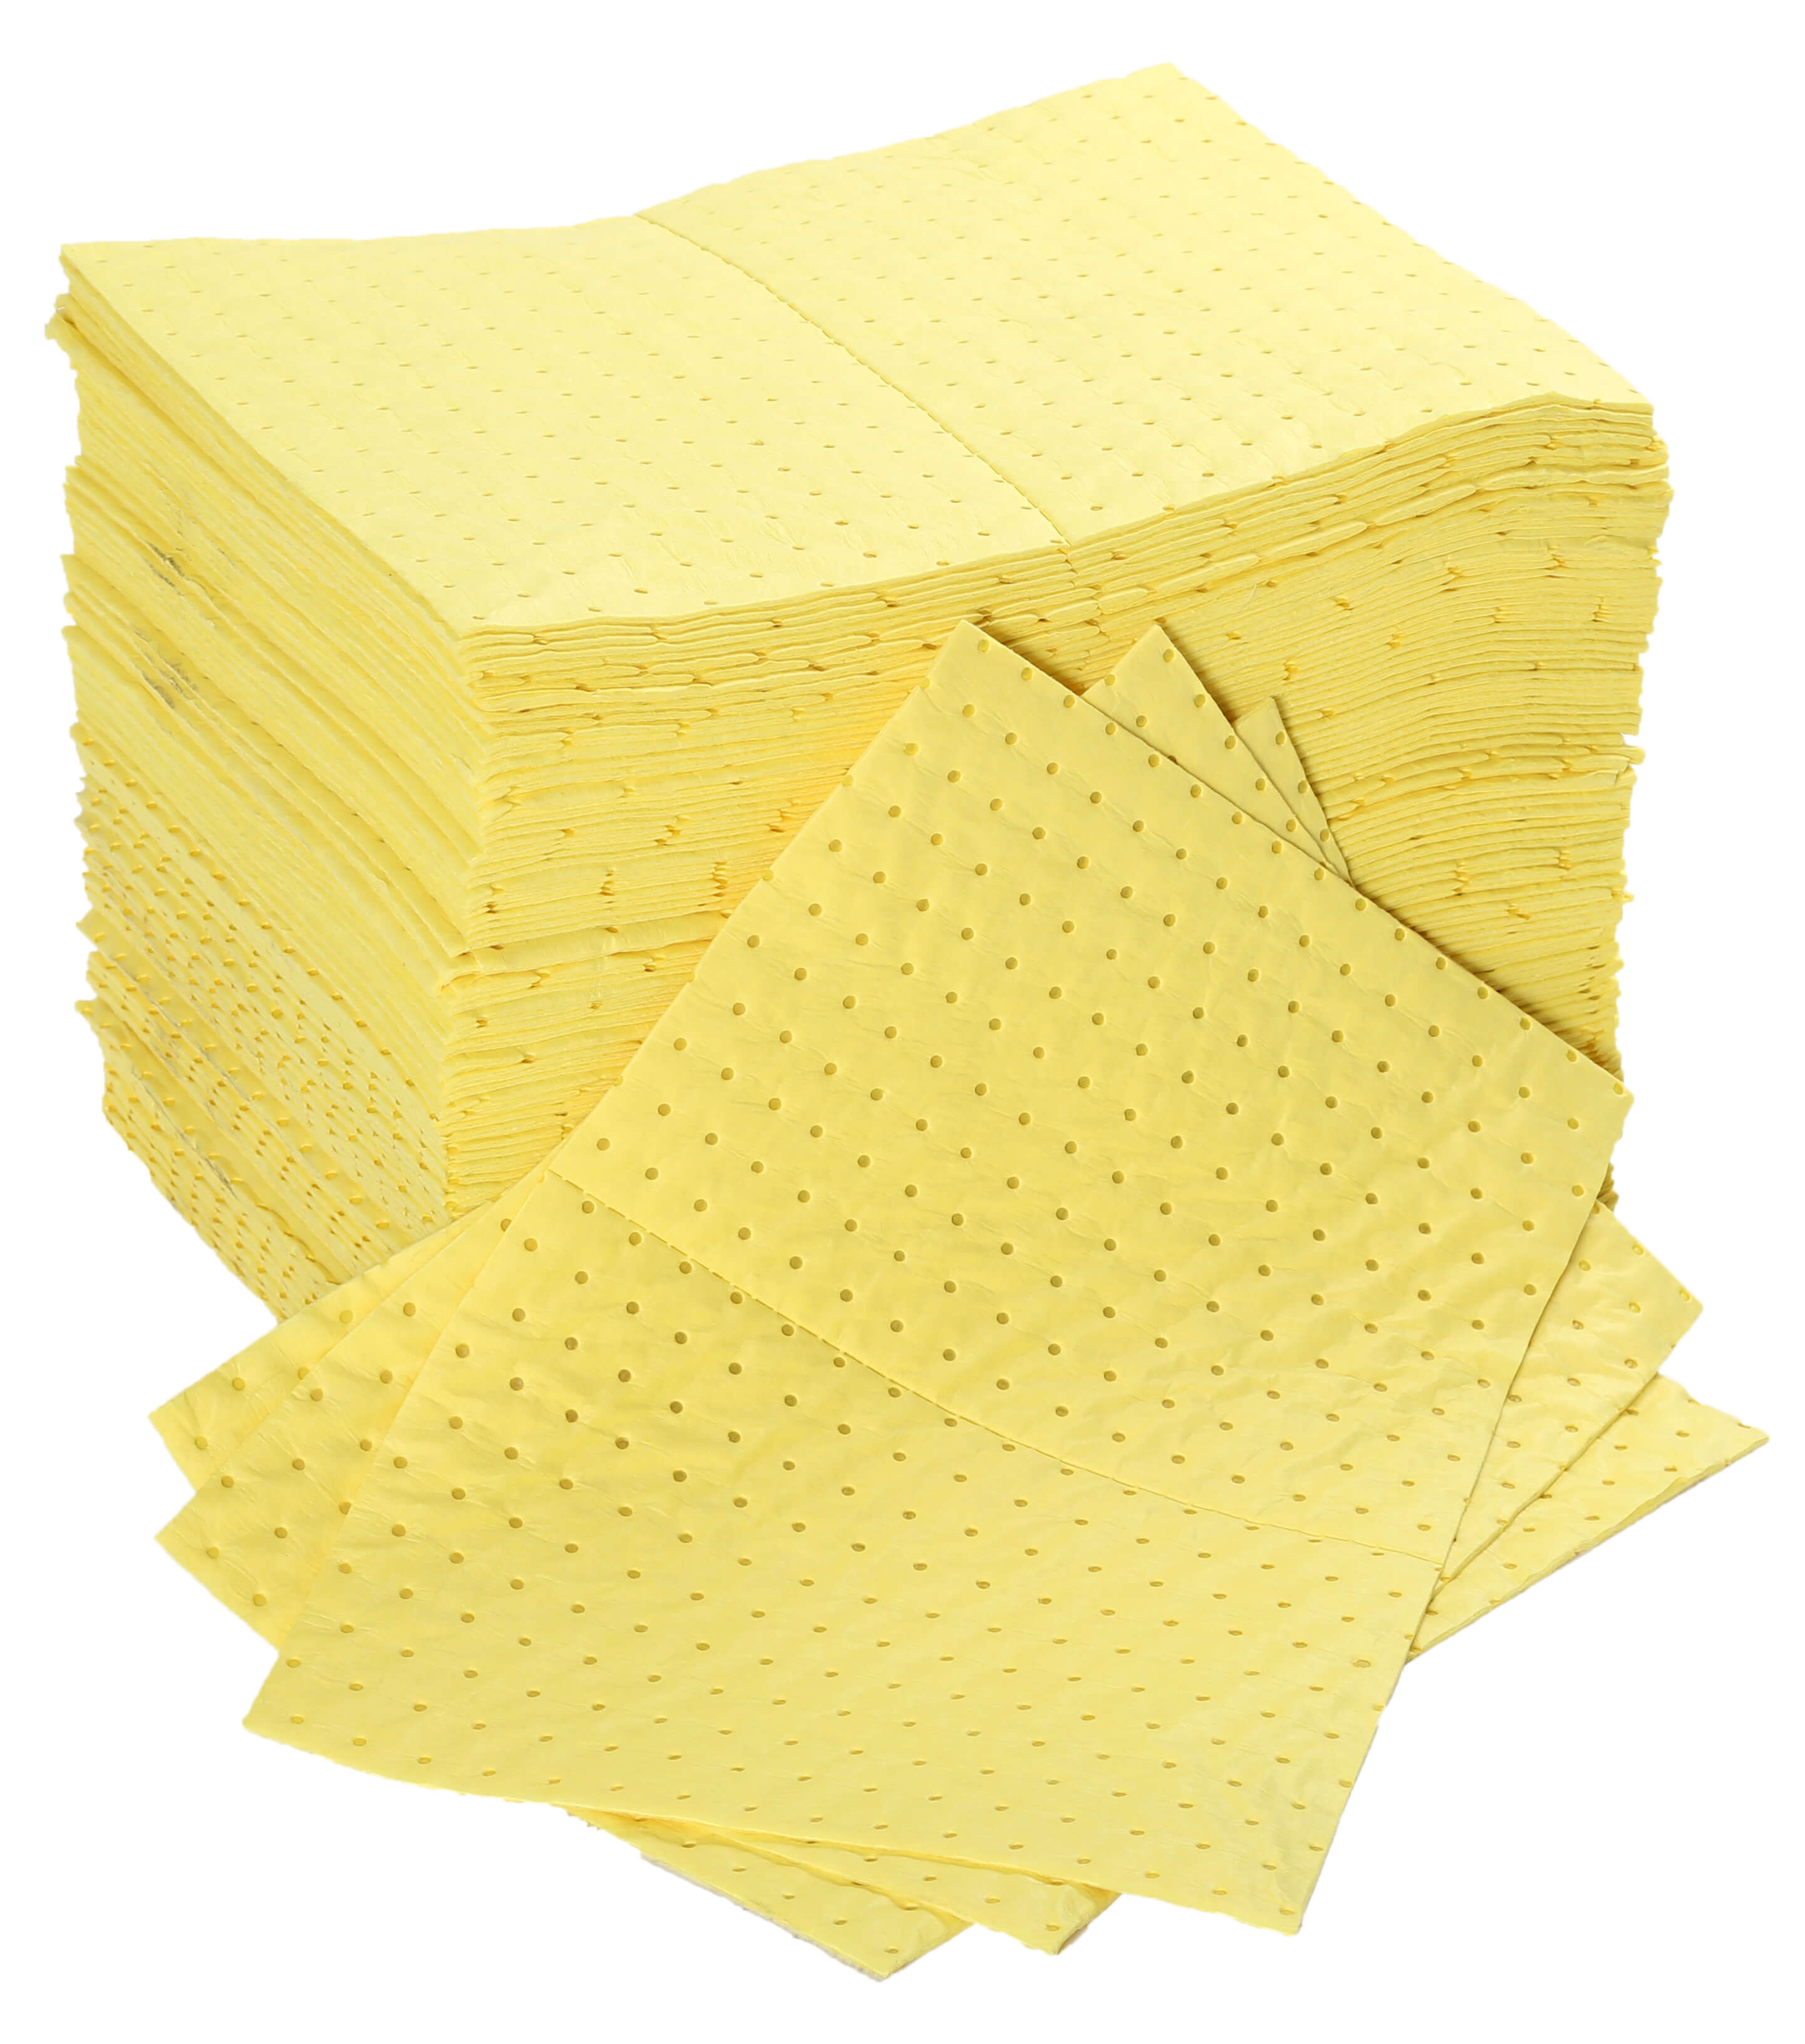 Premium Weight Chemical Absorbent Pads - Box of 100